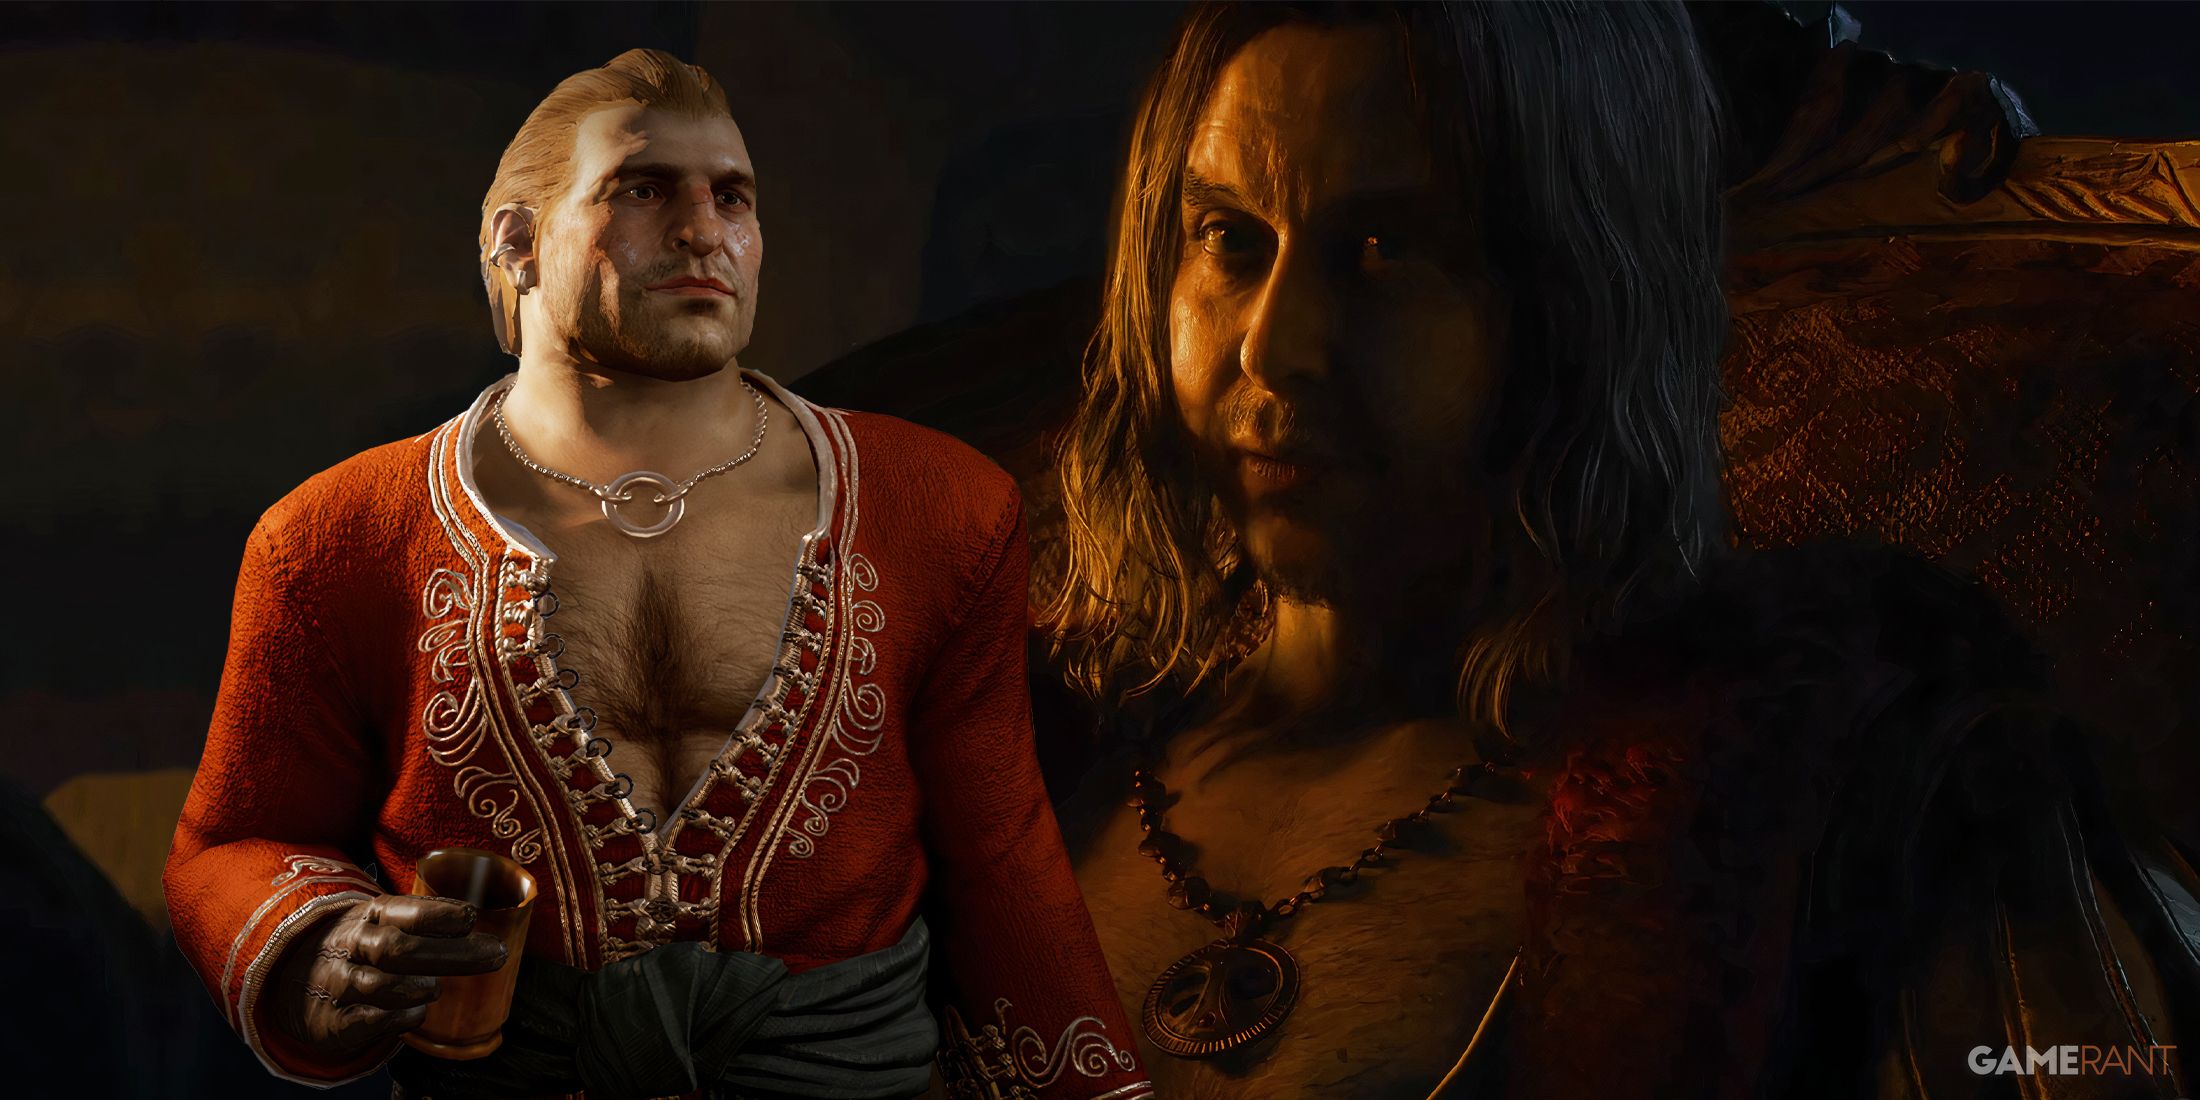 Varric from Dragon Age with Humphrey from Fable